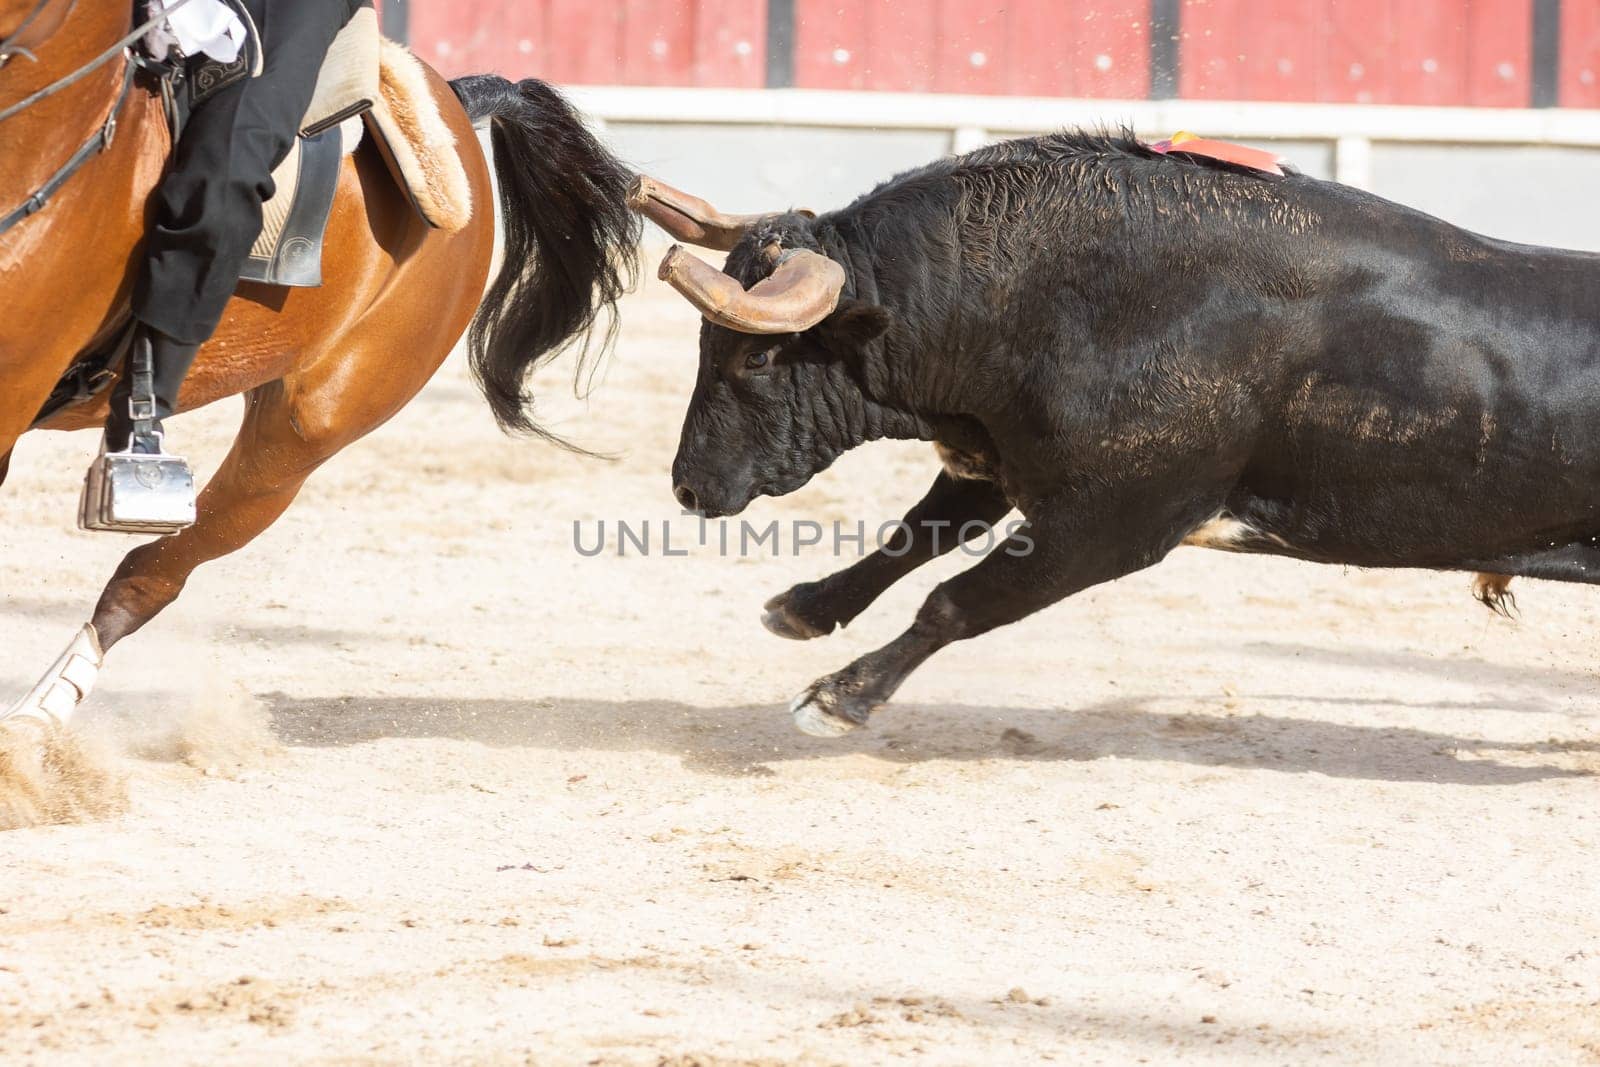 March 26, 2023 Lisbon, Portugal: Tourada - a bull chasing a rider on a horse in the arena. Mid shot